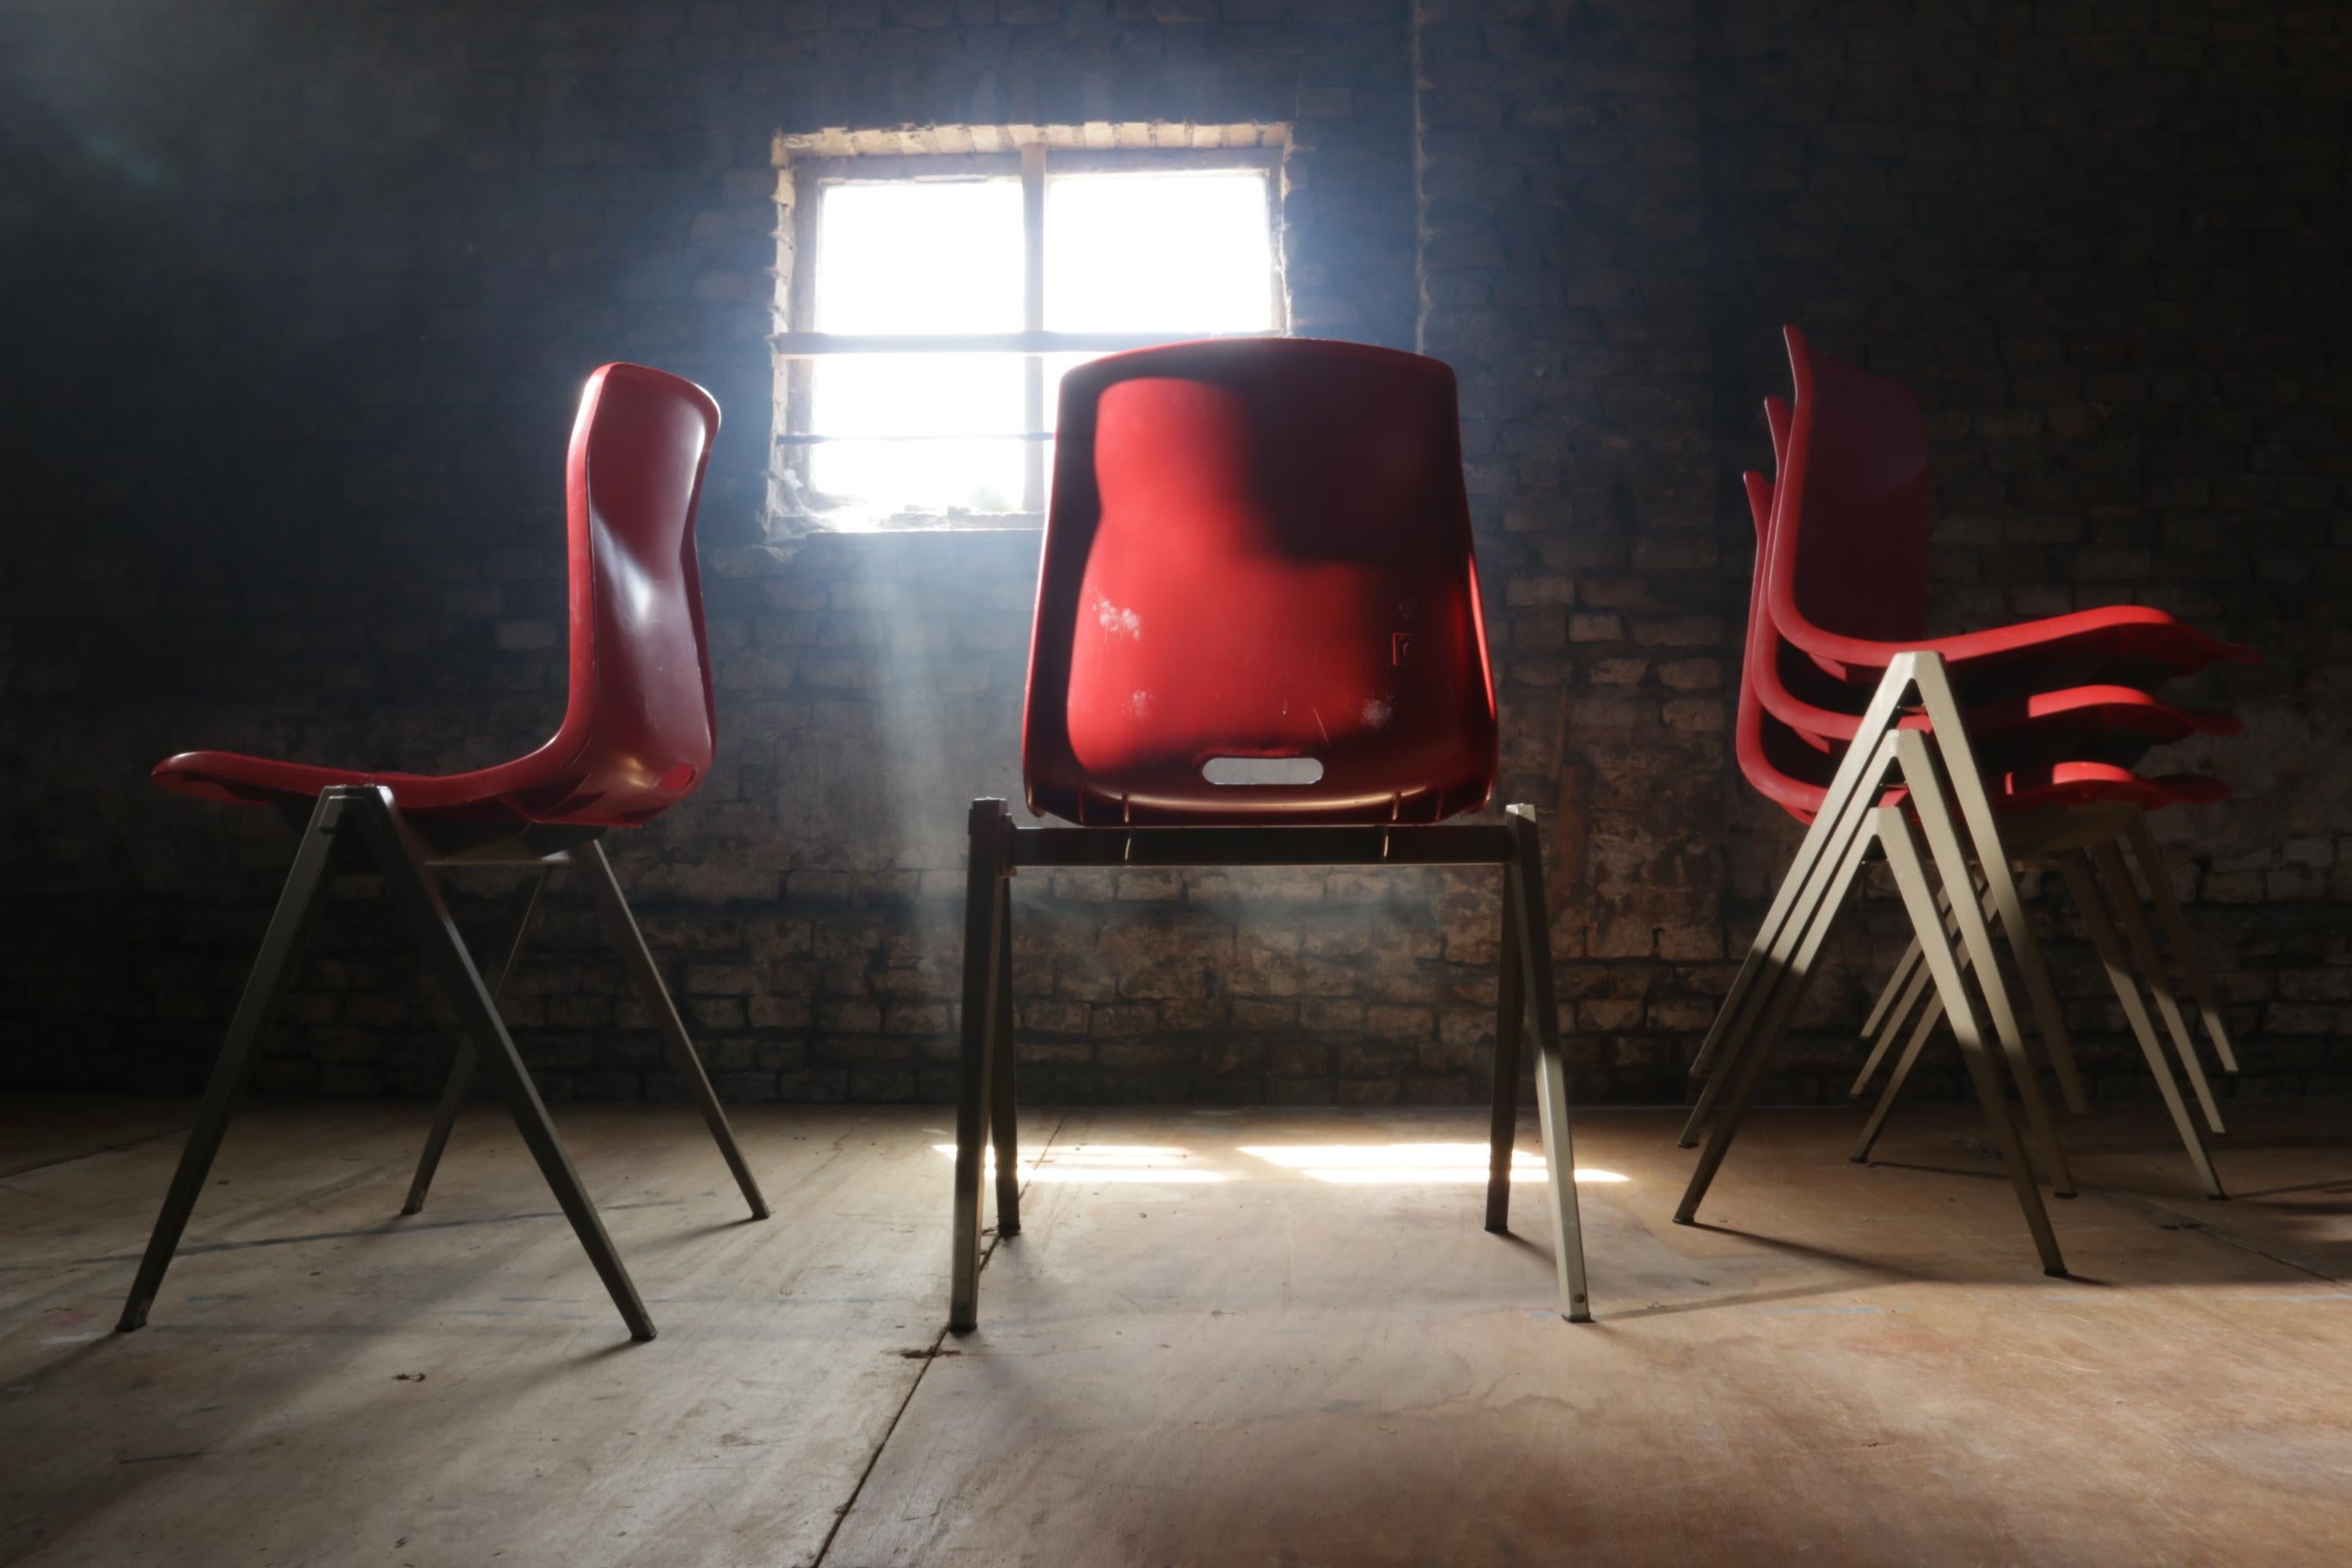 Industrial Galvanitas S22 Compass / Pyramid School chairs from the 1960s.
The chair has a light gray coated metal frame, a plastic molded seat with closed shell in a red color.
This legs are very easy stack able on each other. In this way you